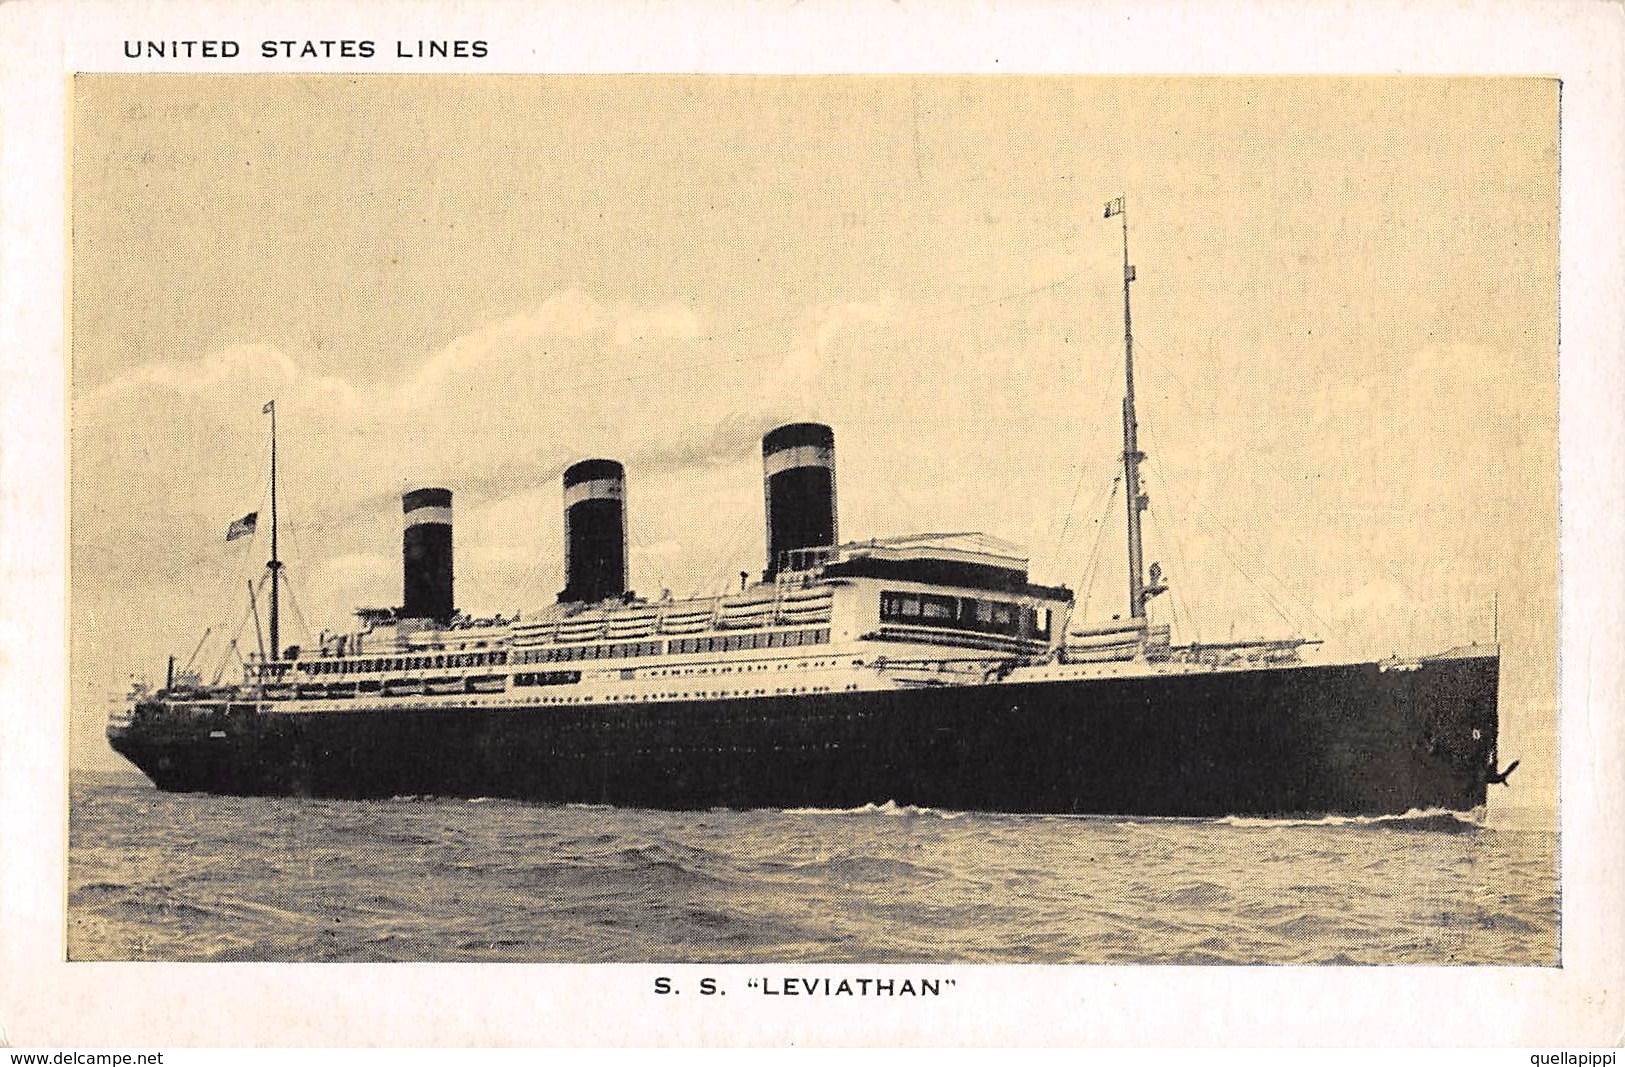 05826 "TRANSATLANTICO S.S. LEVIATHAN - 65640 TONS - INITED STATES LINES" CART SPED - Banken